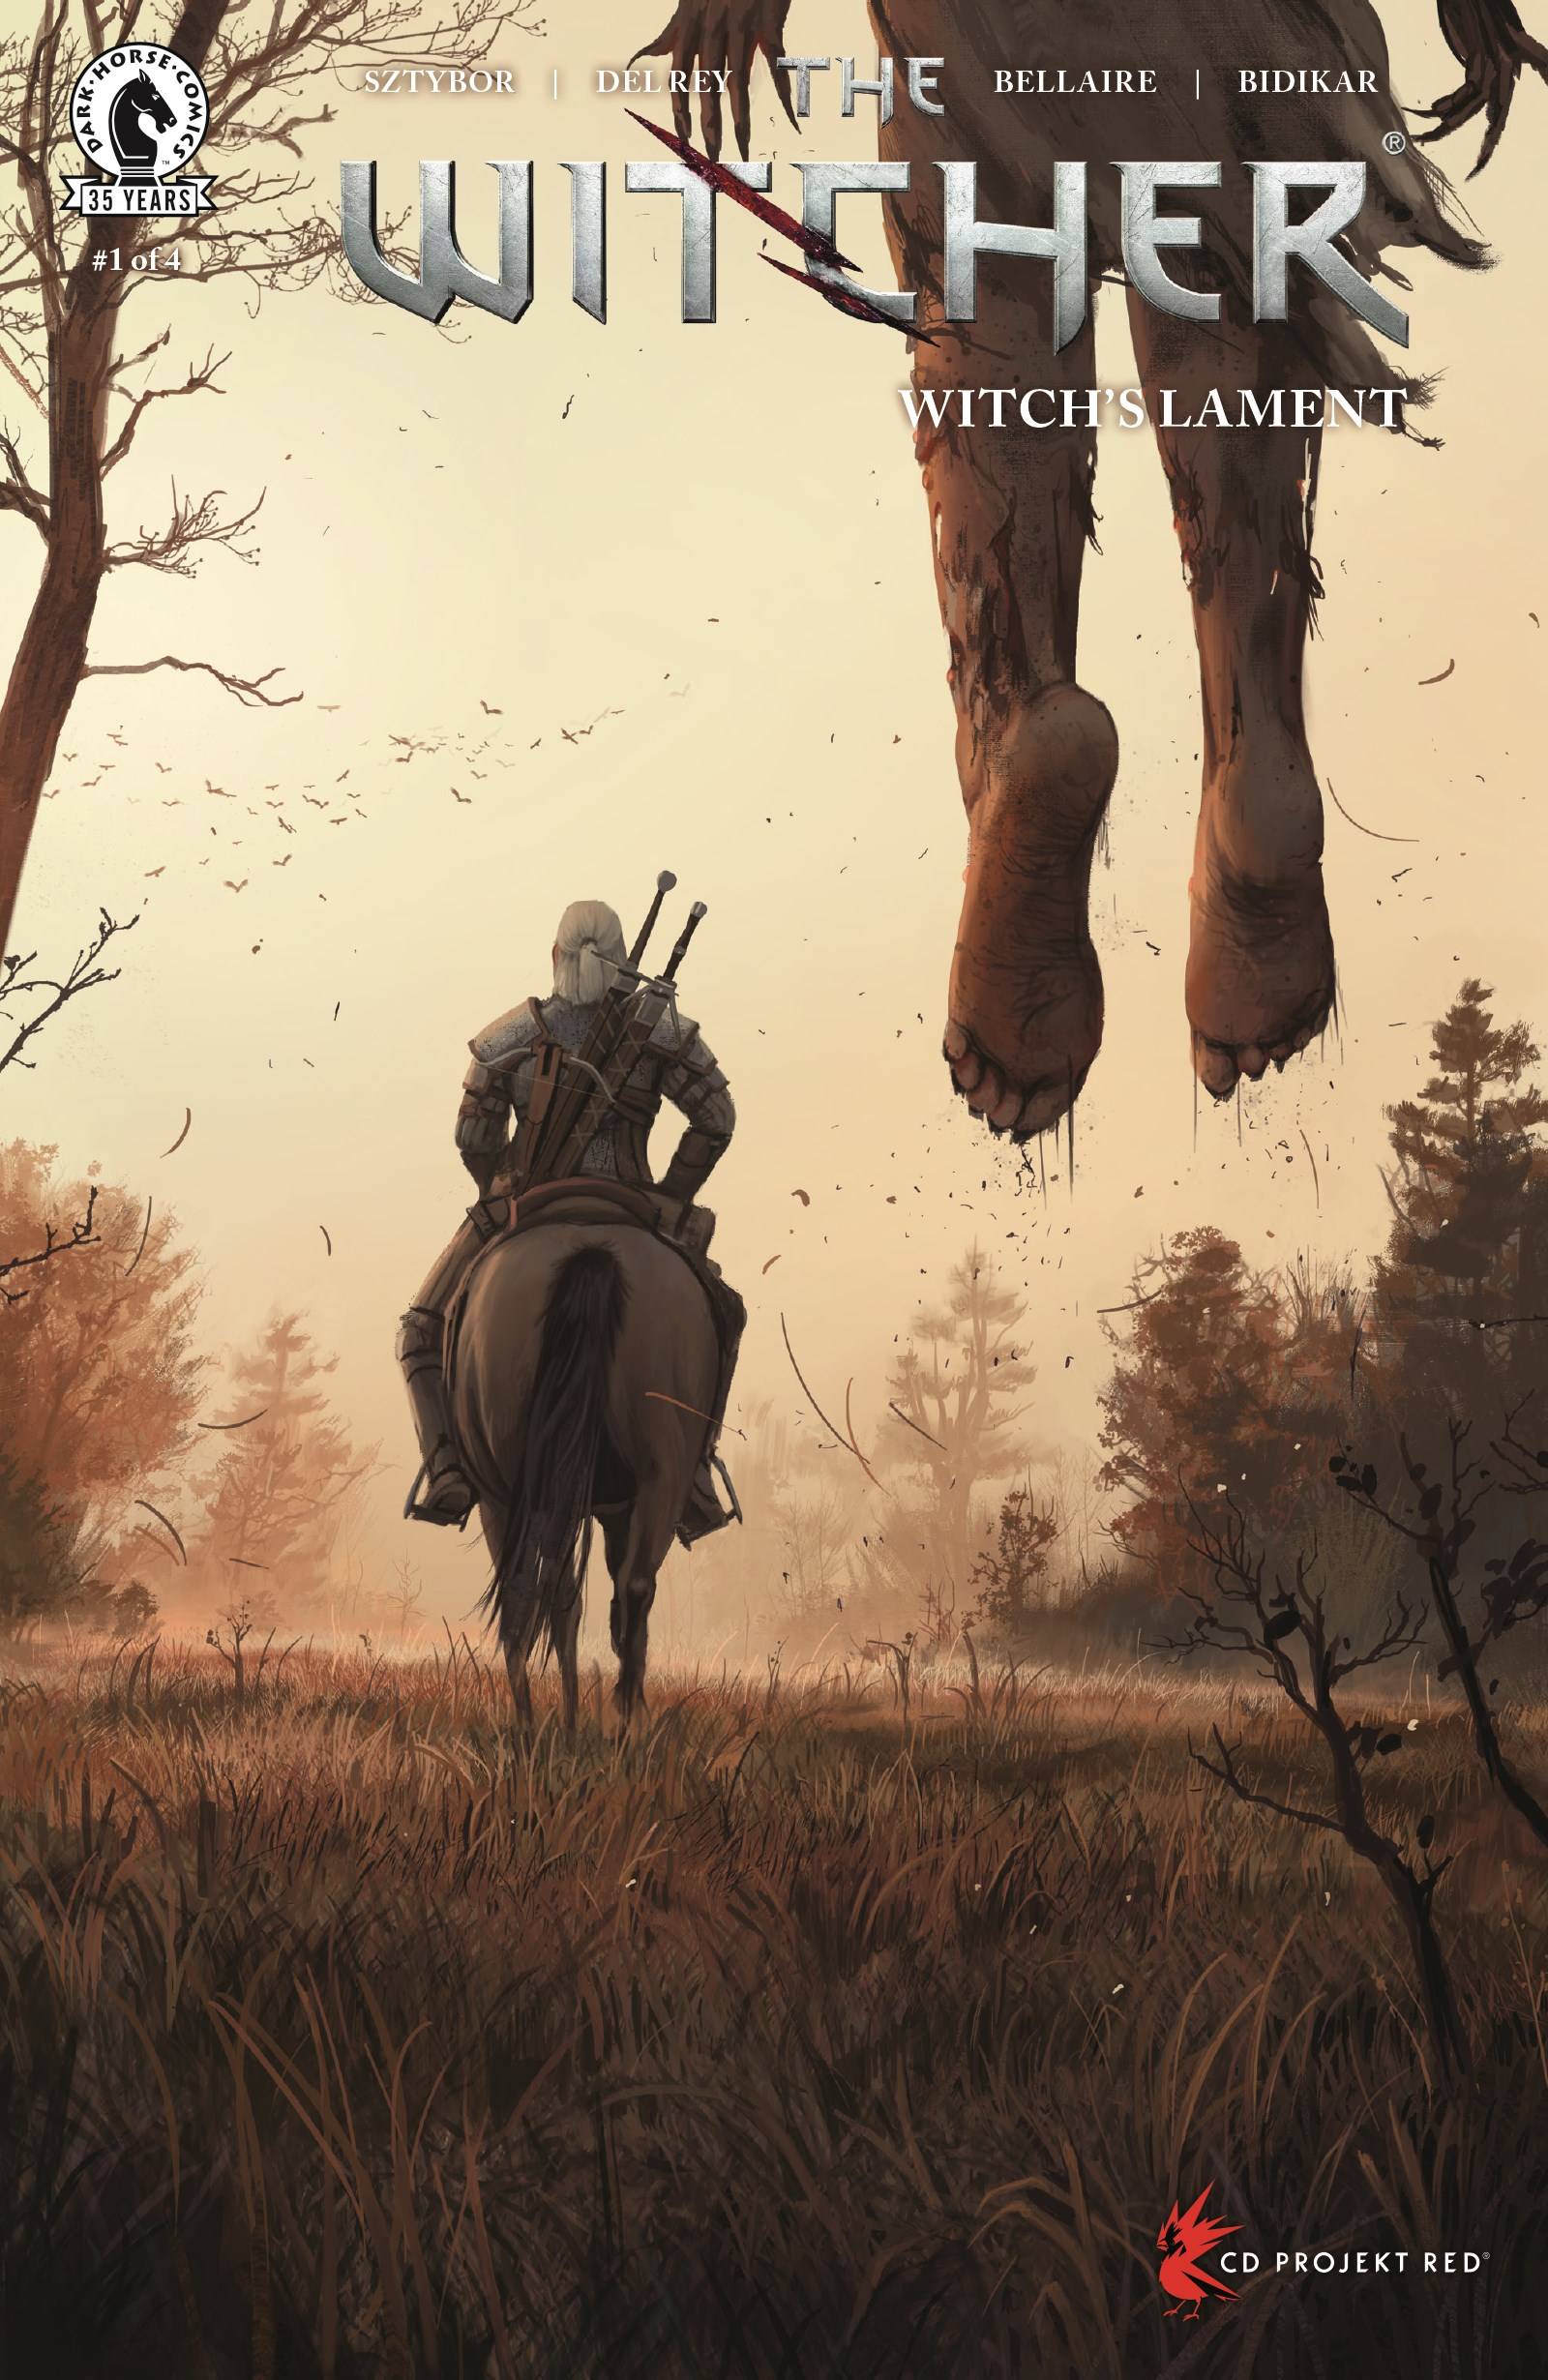 WITCHER WITCHS LAMENT #1 (OF 4) CVR C KOIDL